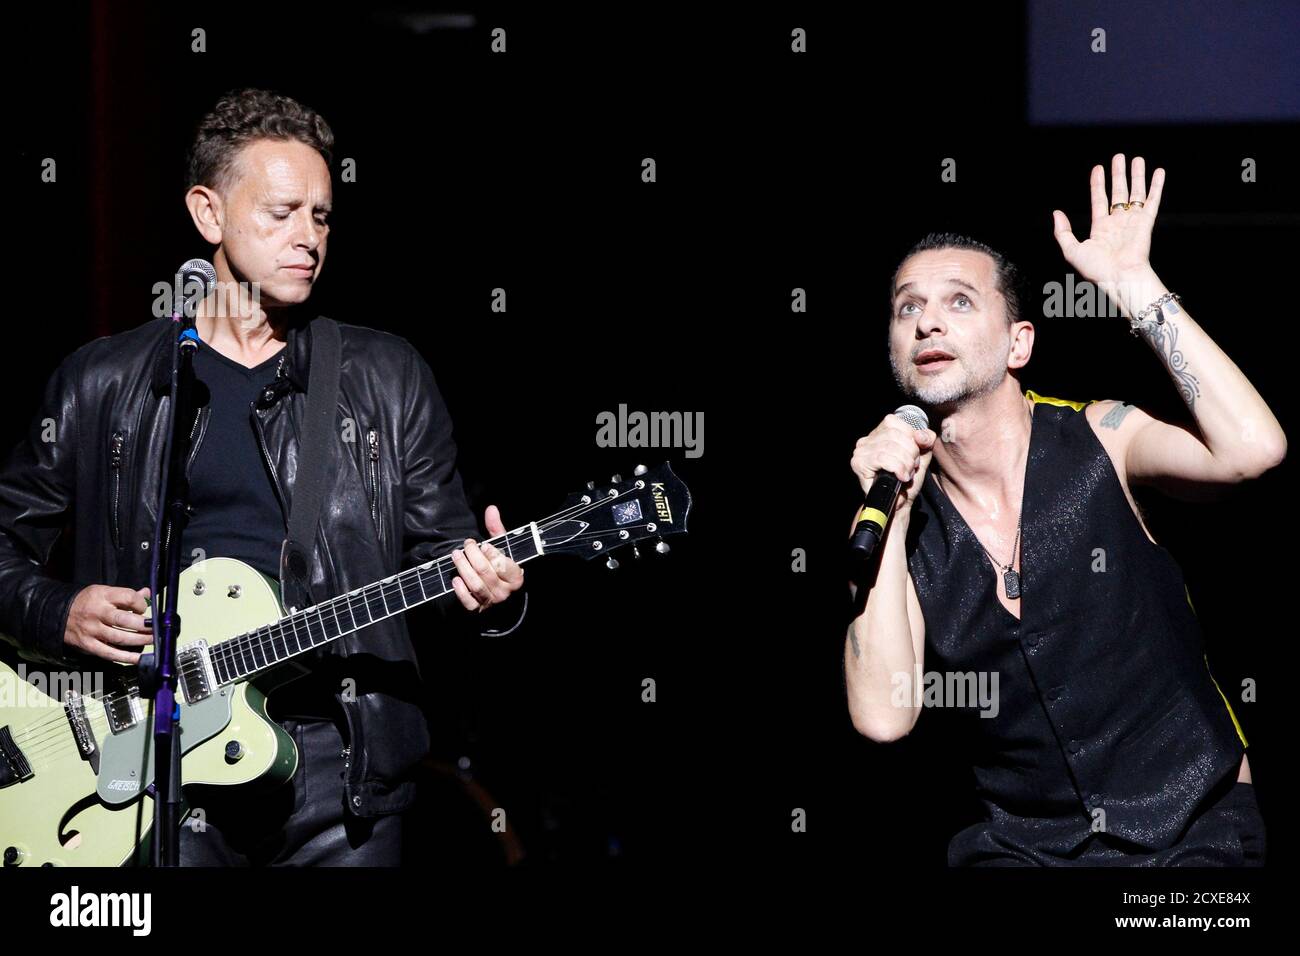 Dave Gahan (R) and Martin Gore of British band Depeche Mode perform "Reach  out and touch me" during the 7th Annual MusiCares MAP Fund Benefit concert  in Los Angeles May 6, 2011.